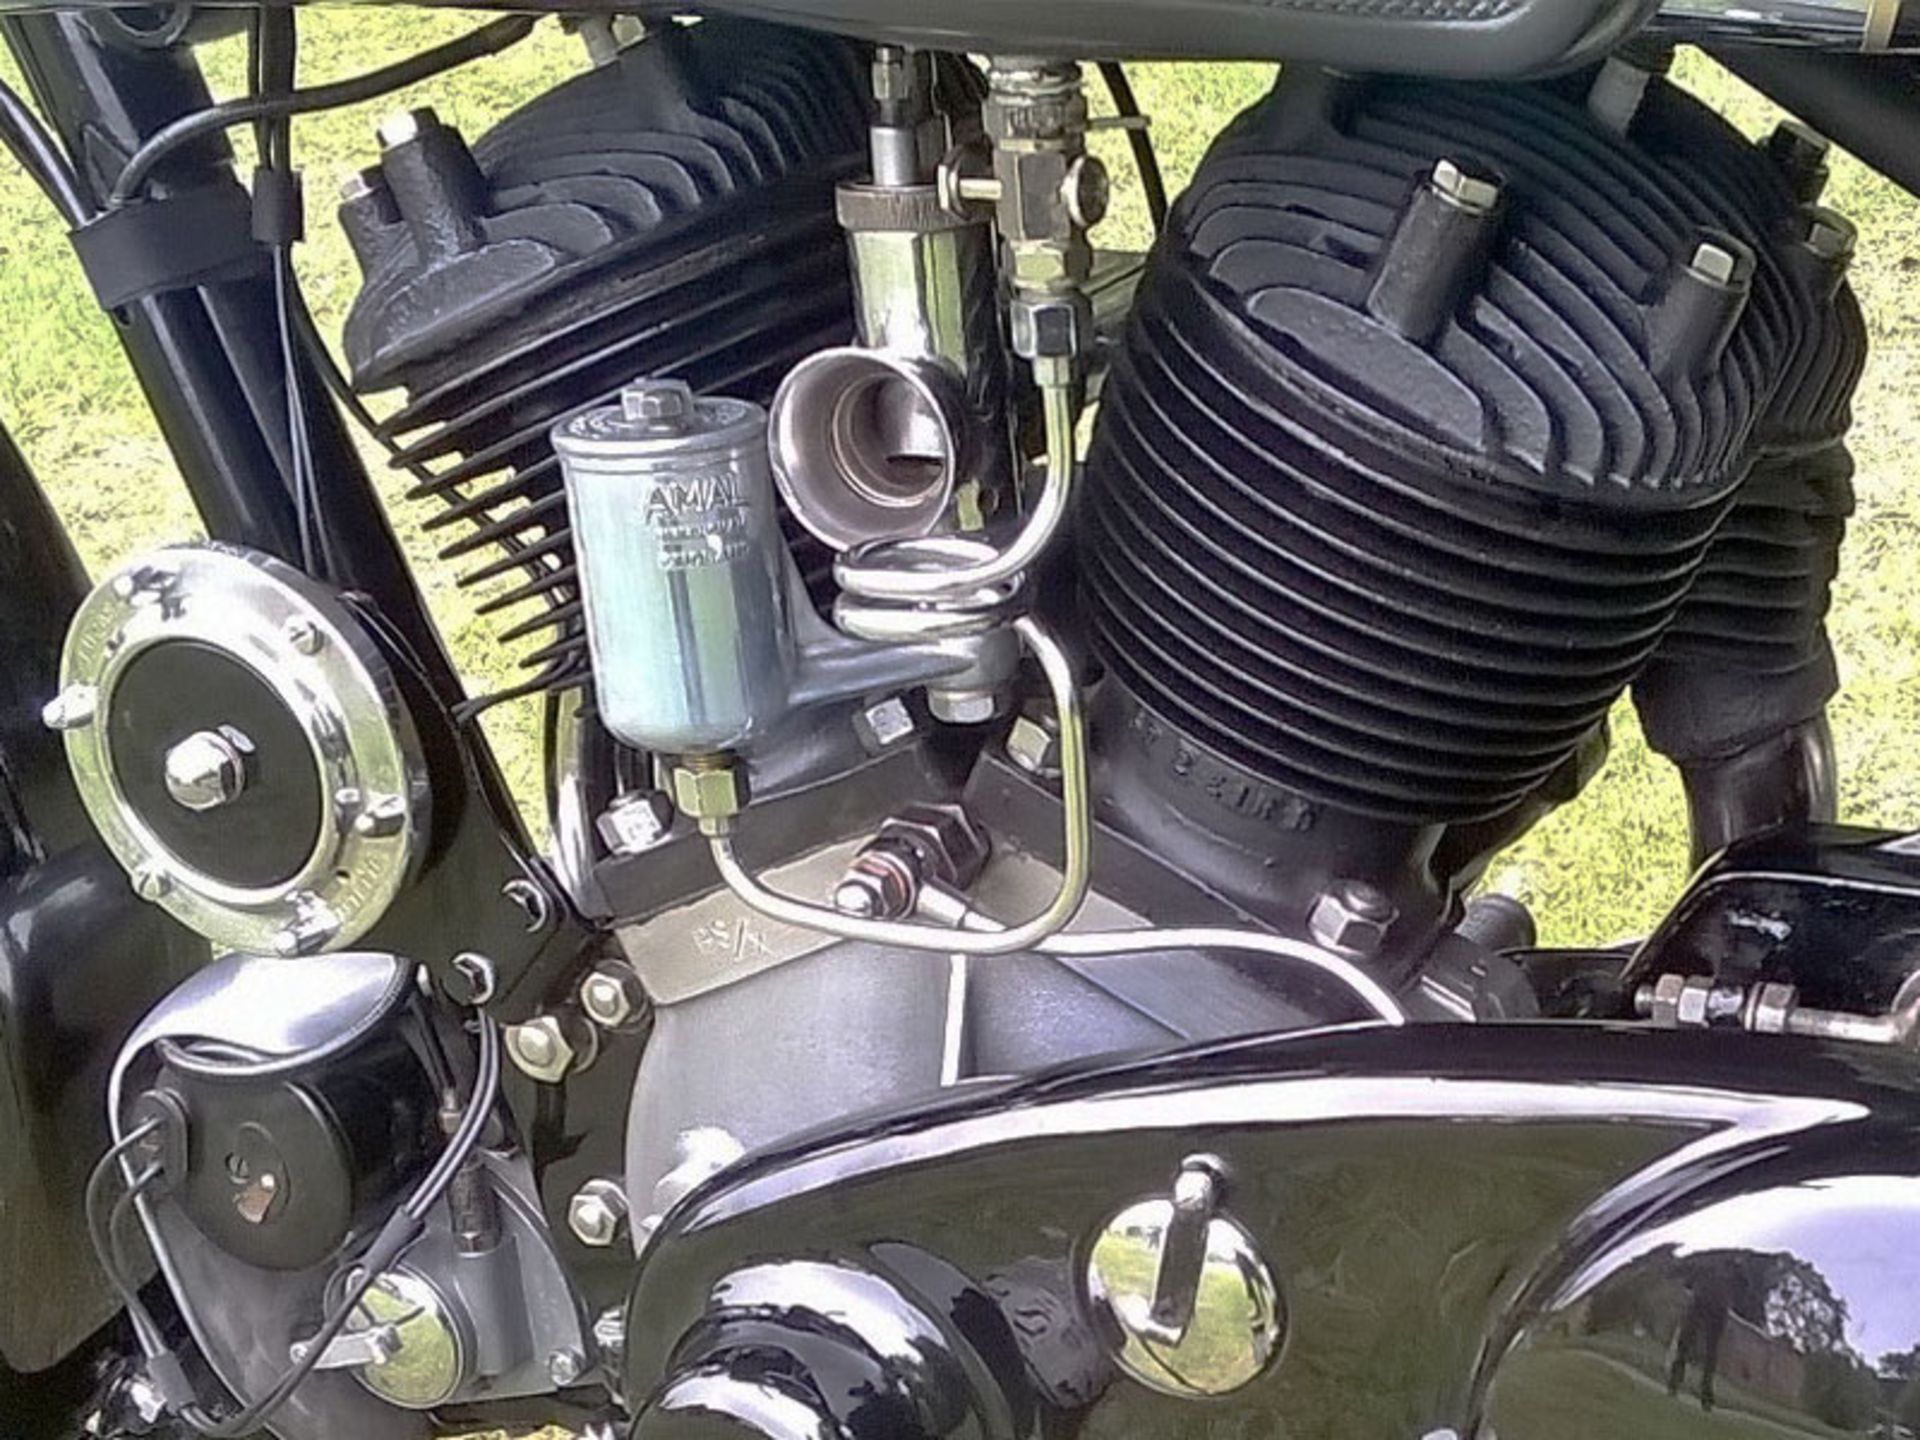 1939 Brough Superior SS80 - Image 5 of 7